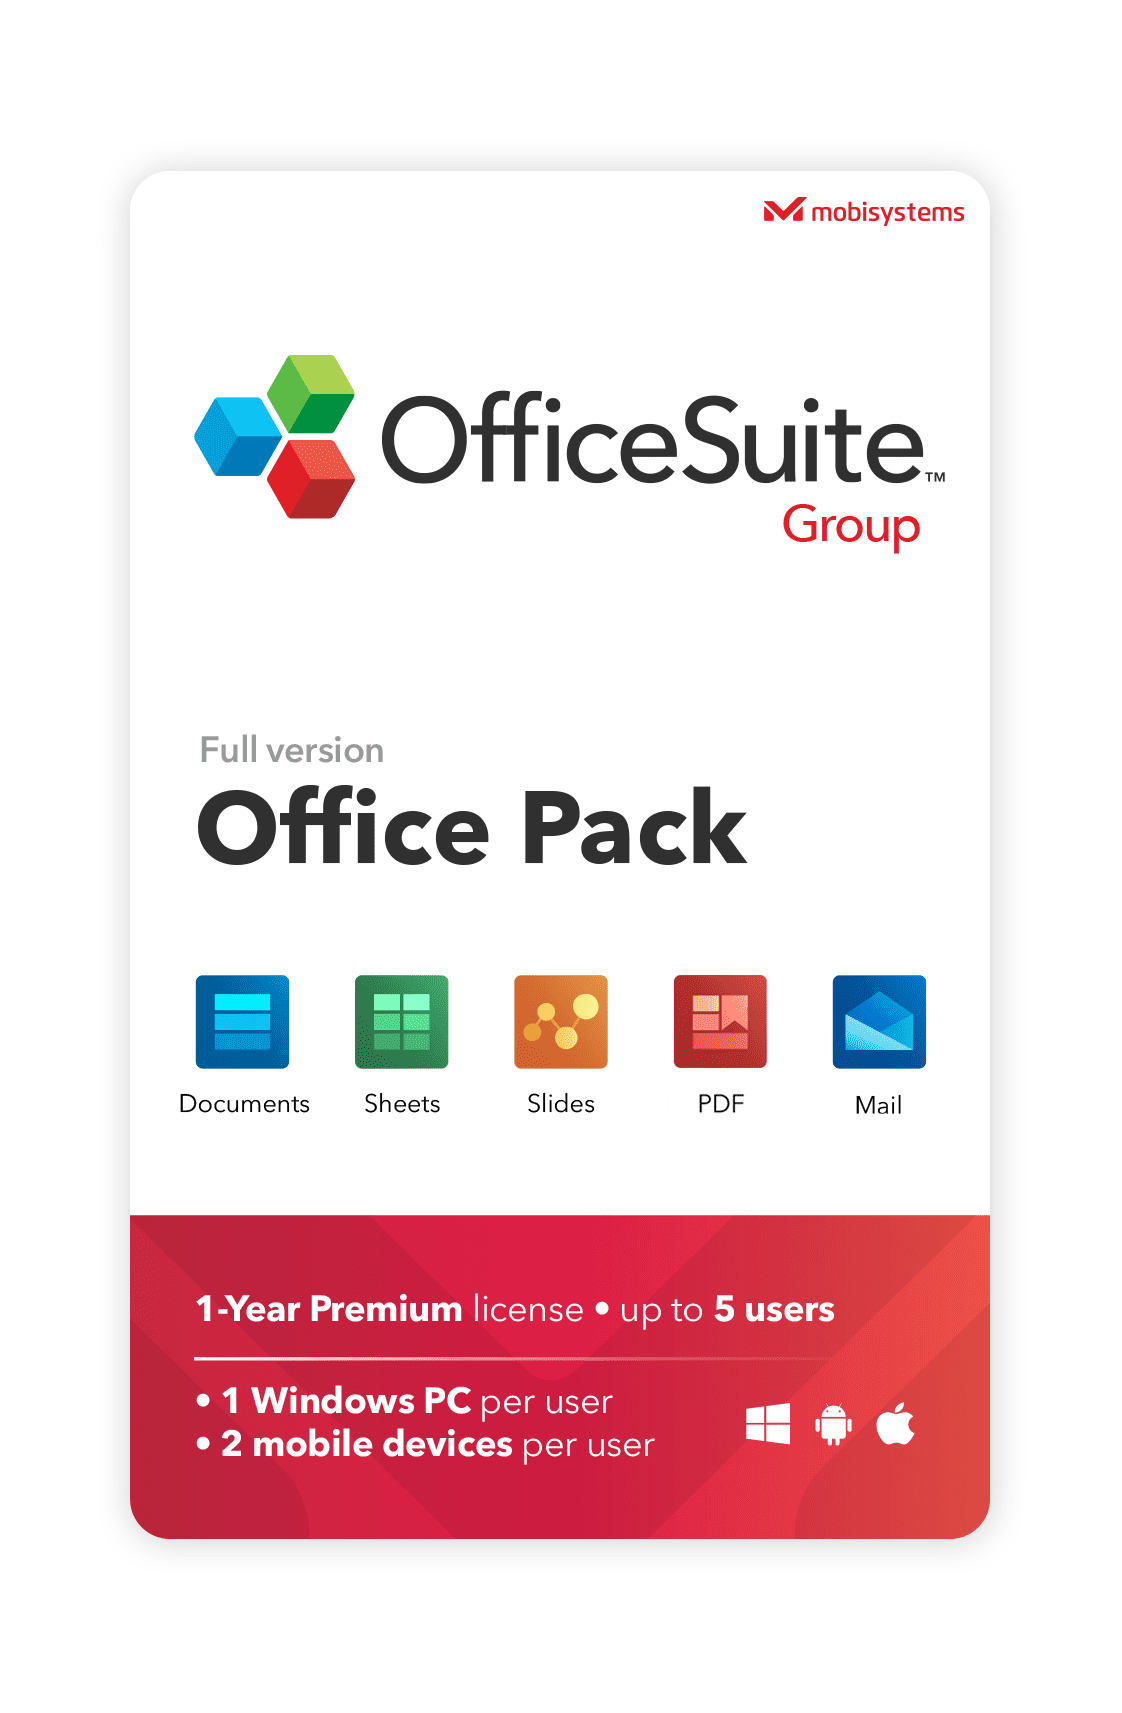 Microsoft Office 365 Personal | 12-month subscription, 1 person 